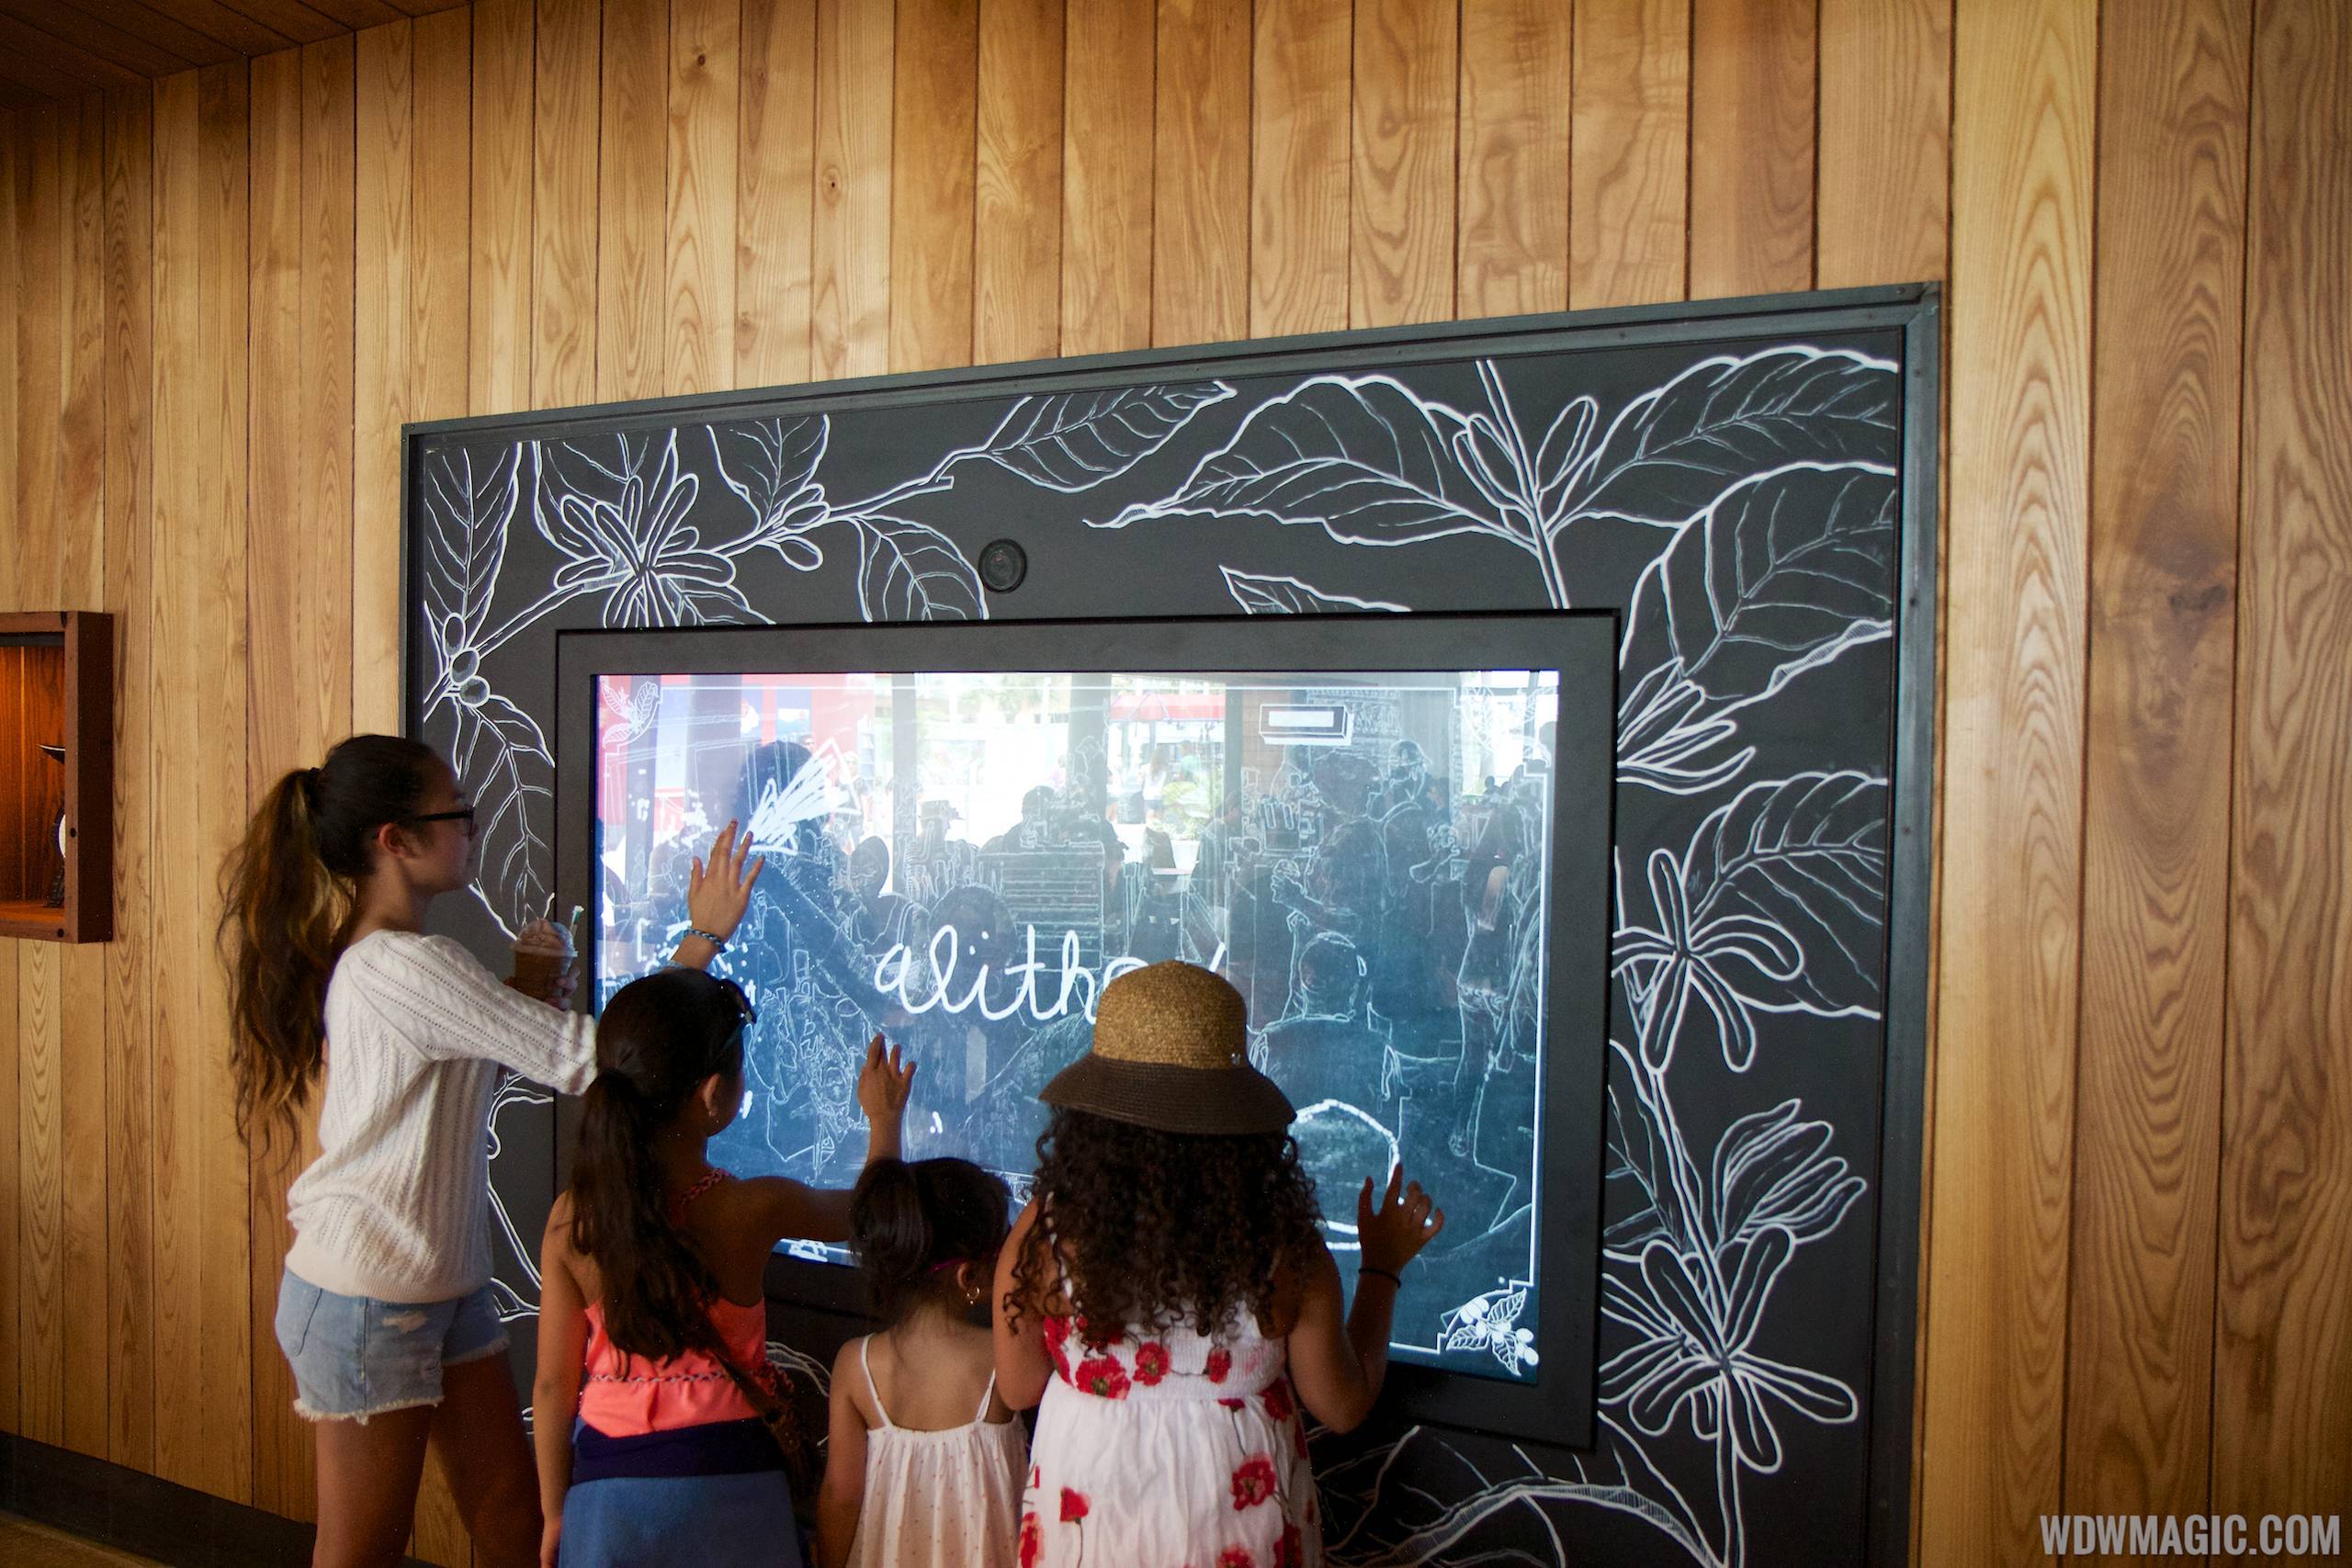 Starbucks West Side interior - Interactive touch screen linked to Disneyland